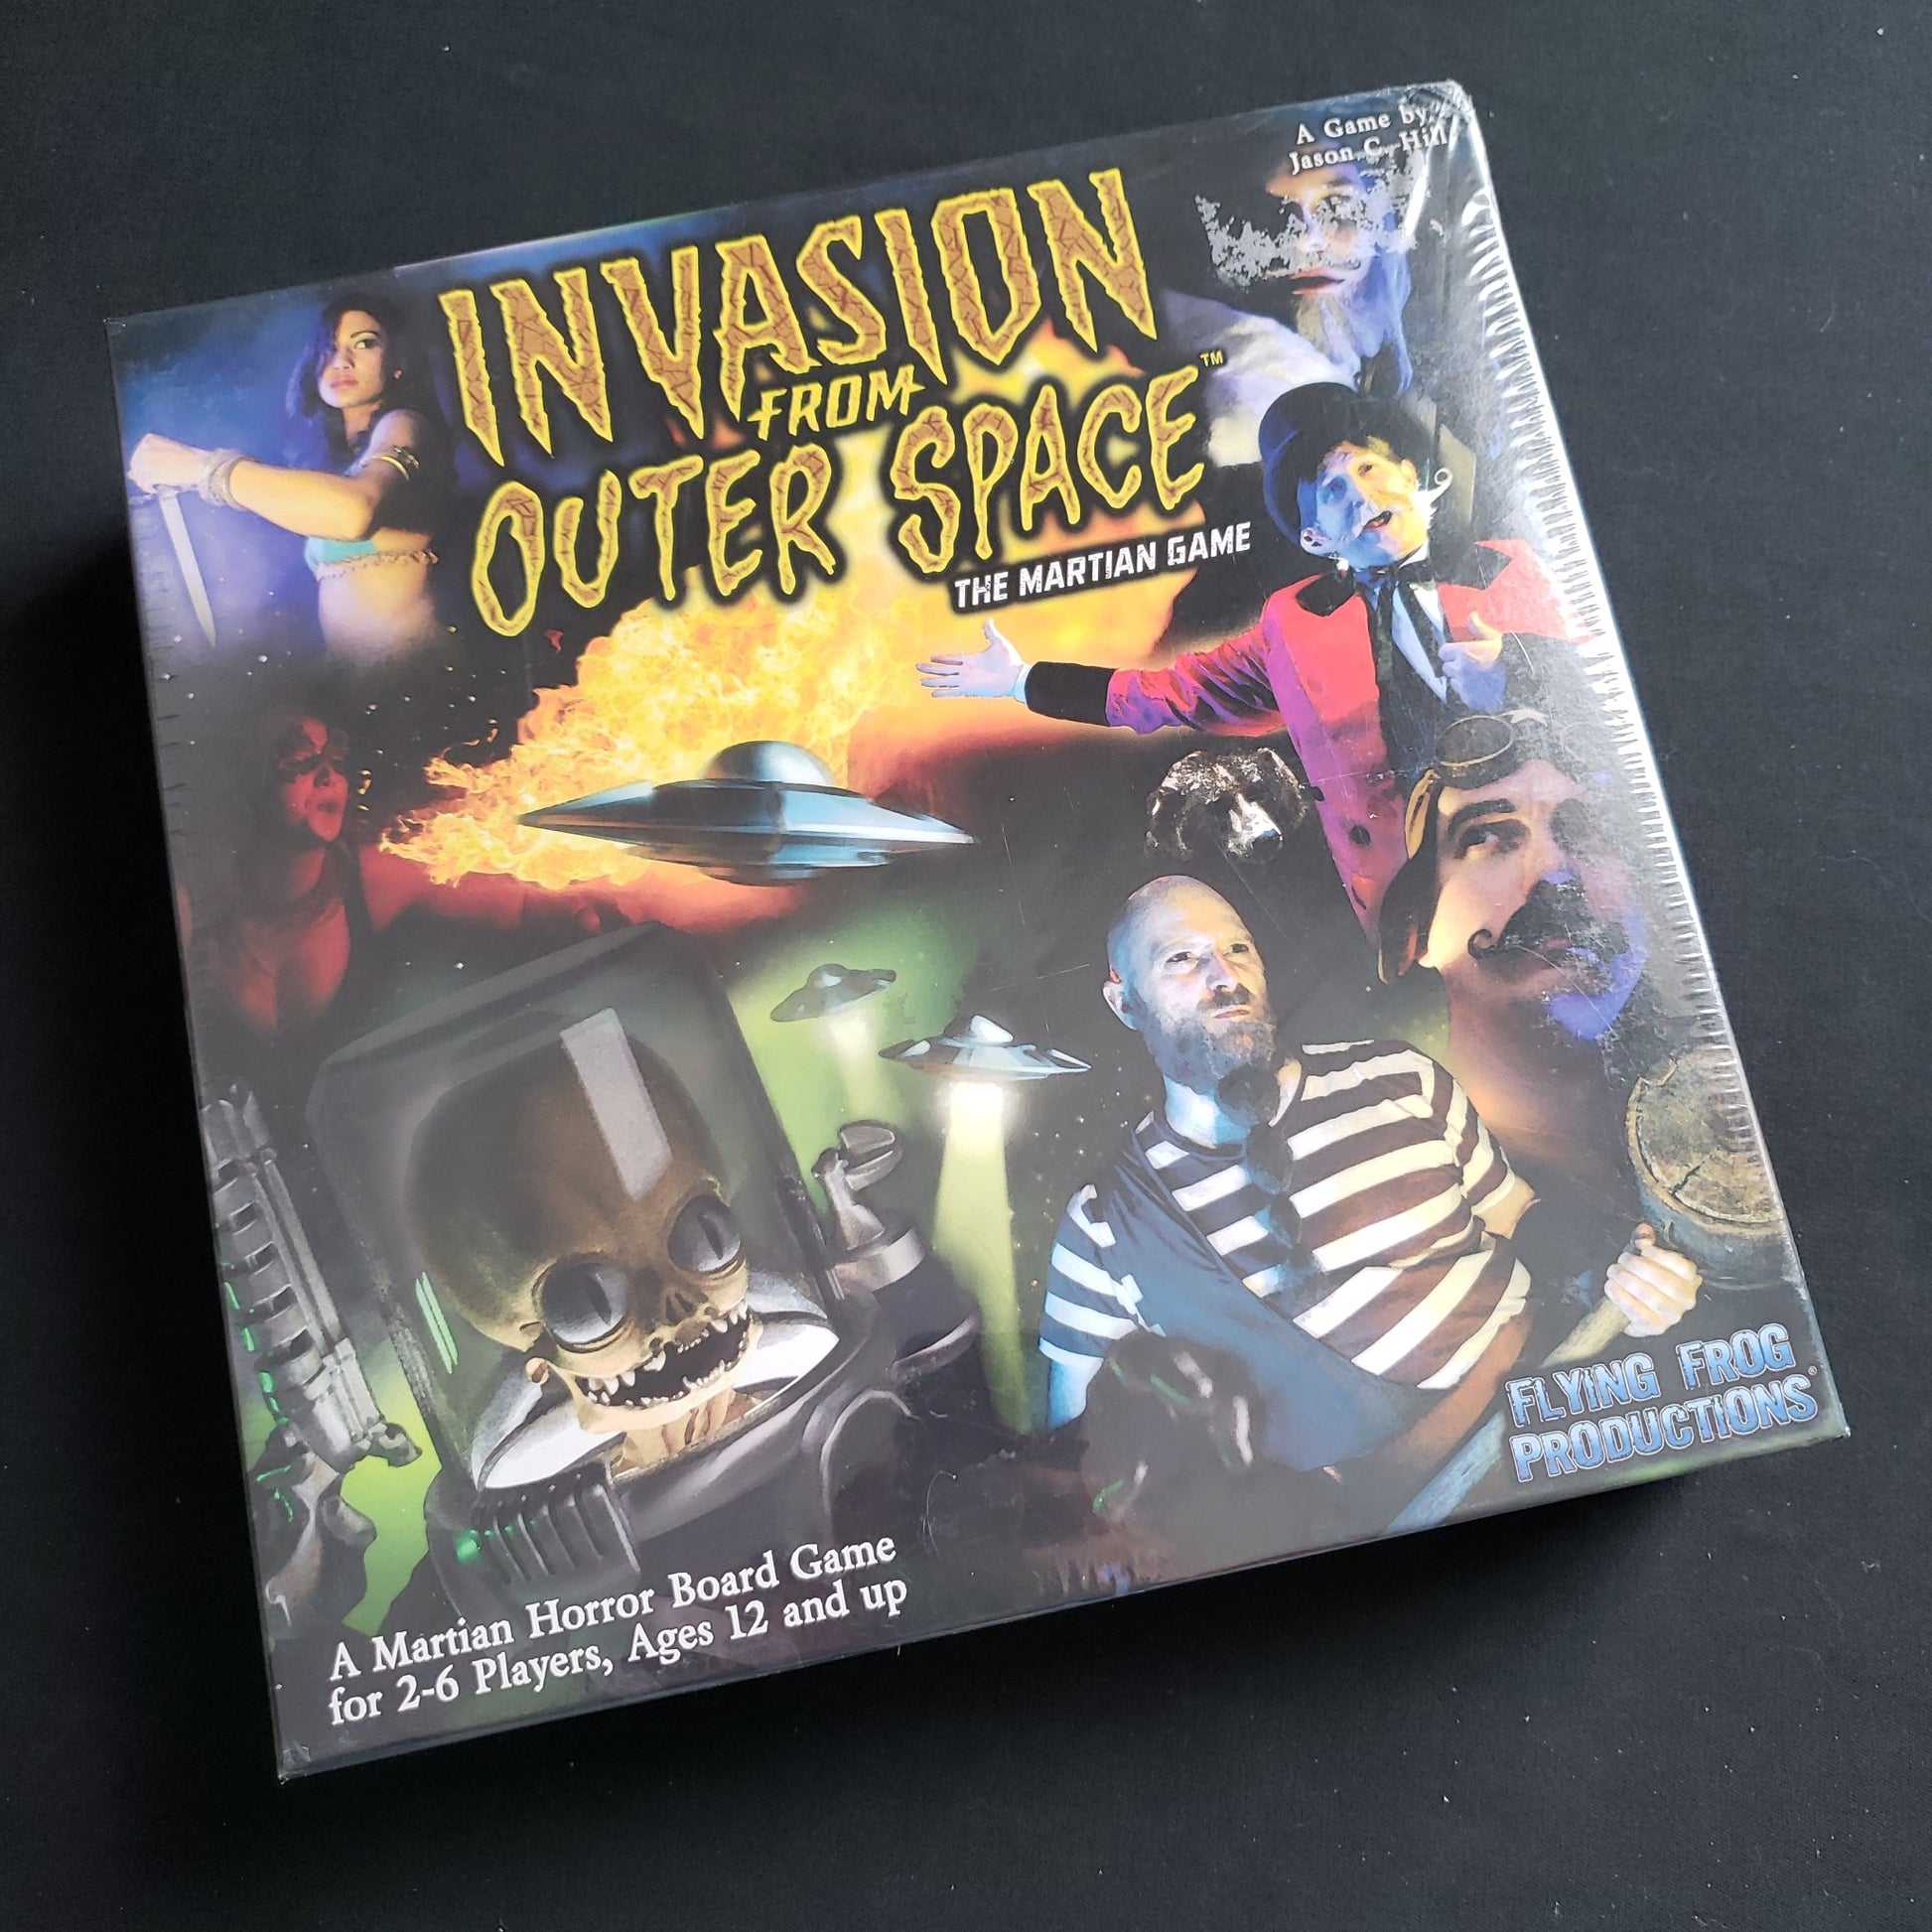 Image shows the front cover of the box of the Invasion from Outer Space board game